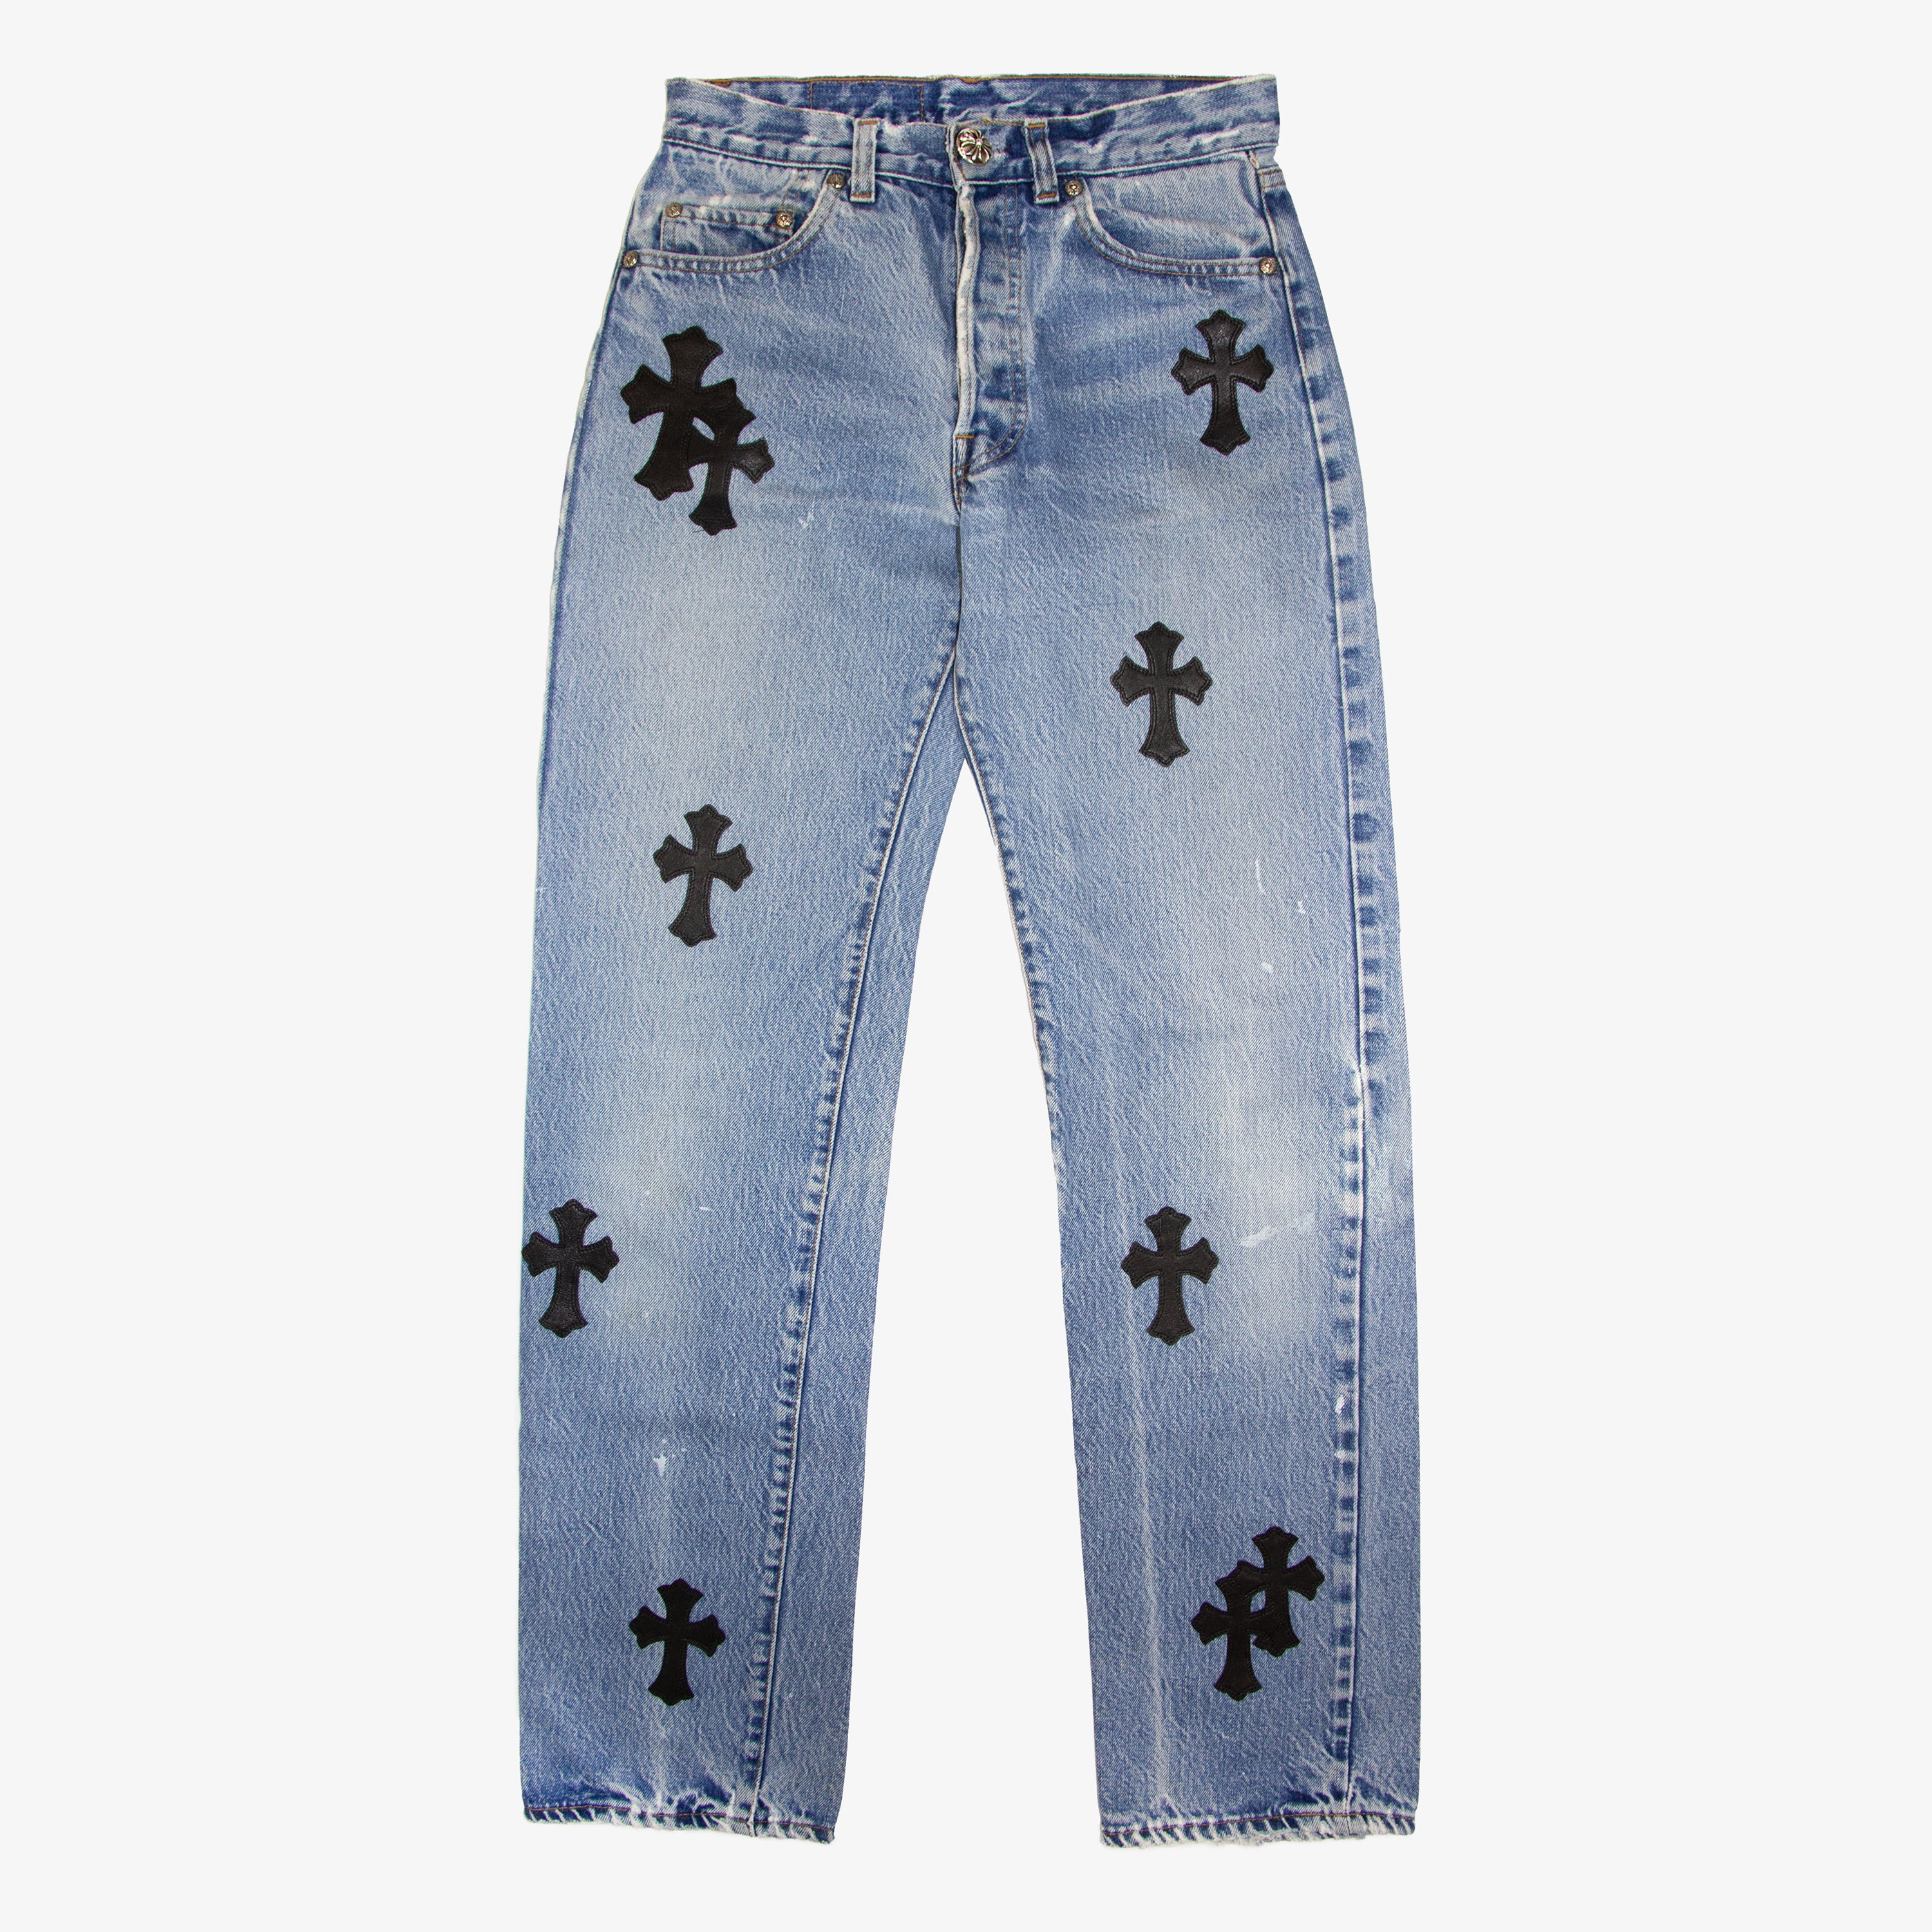 Chrome Hearts Distressed Cross Jeans - ShopperBoard